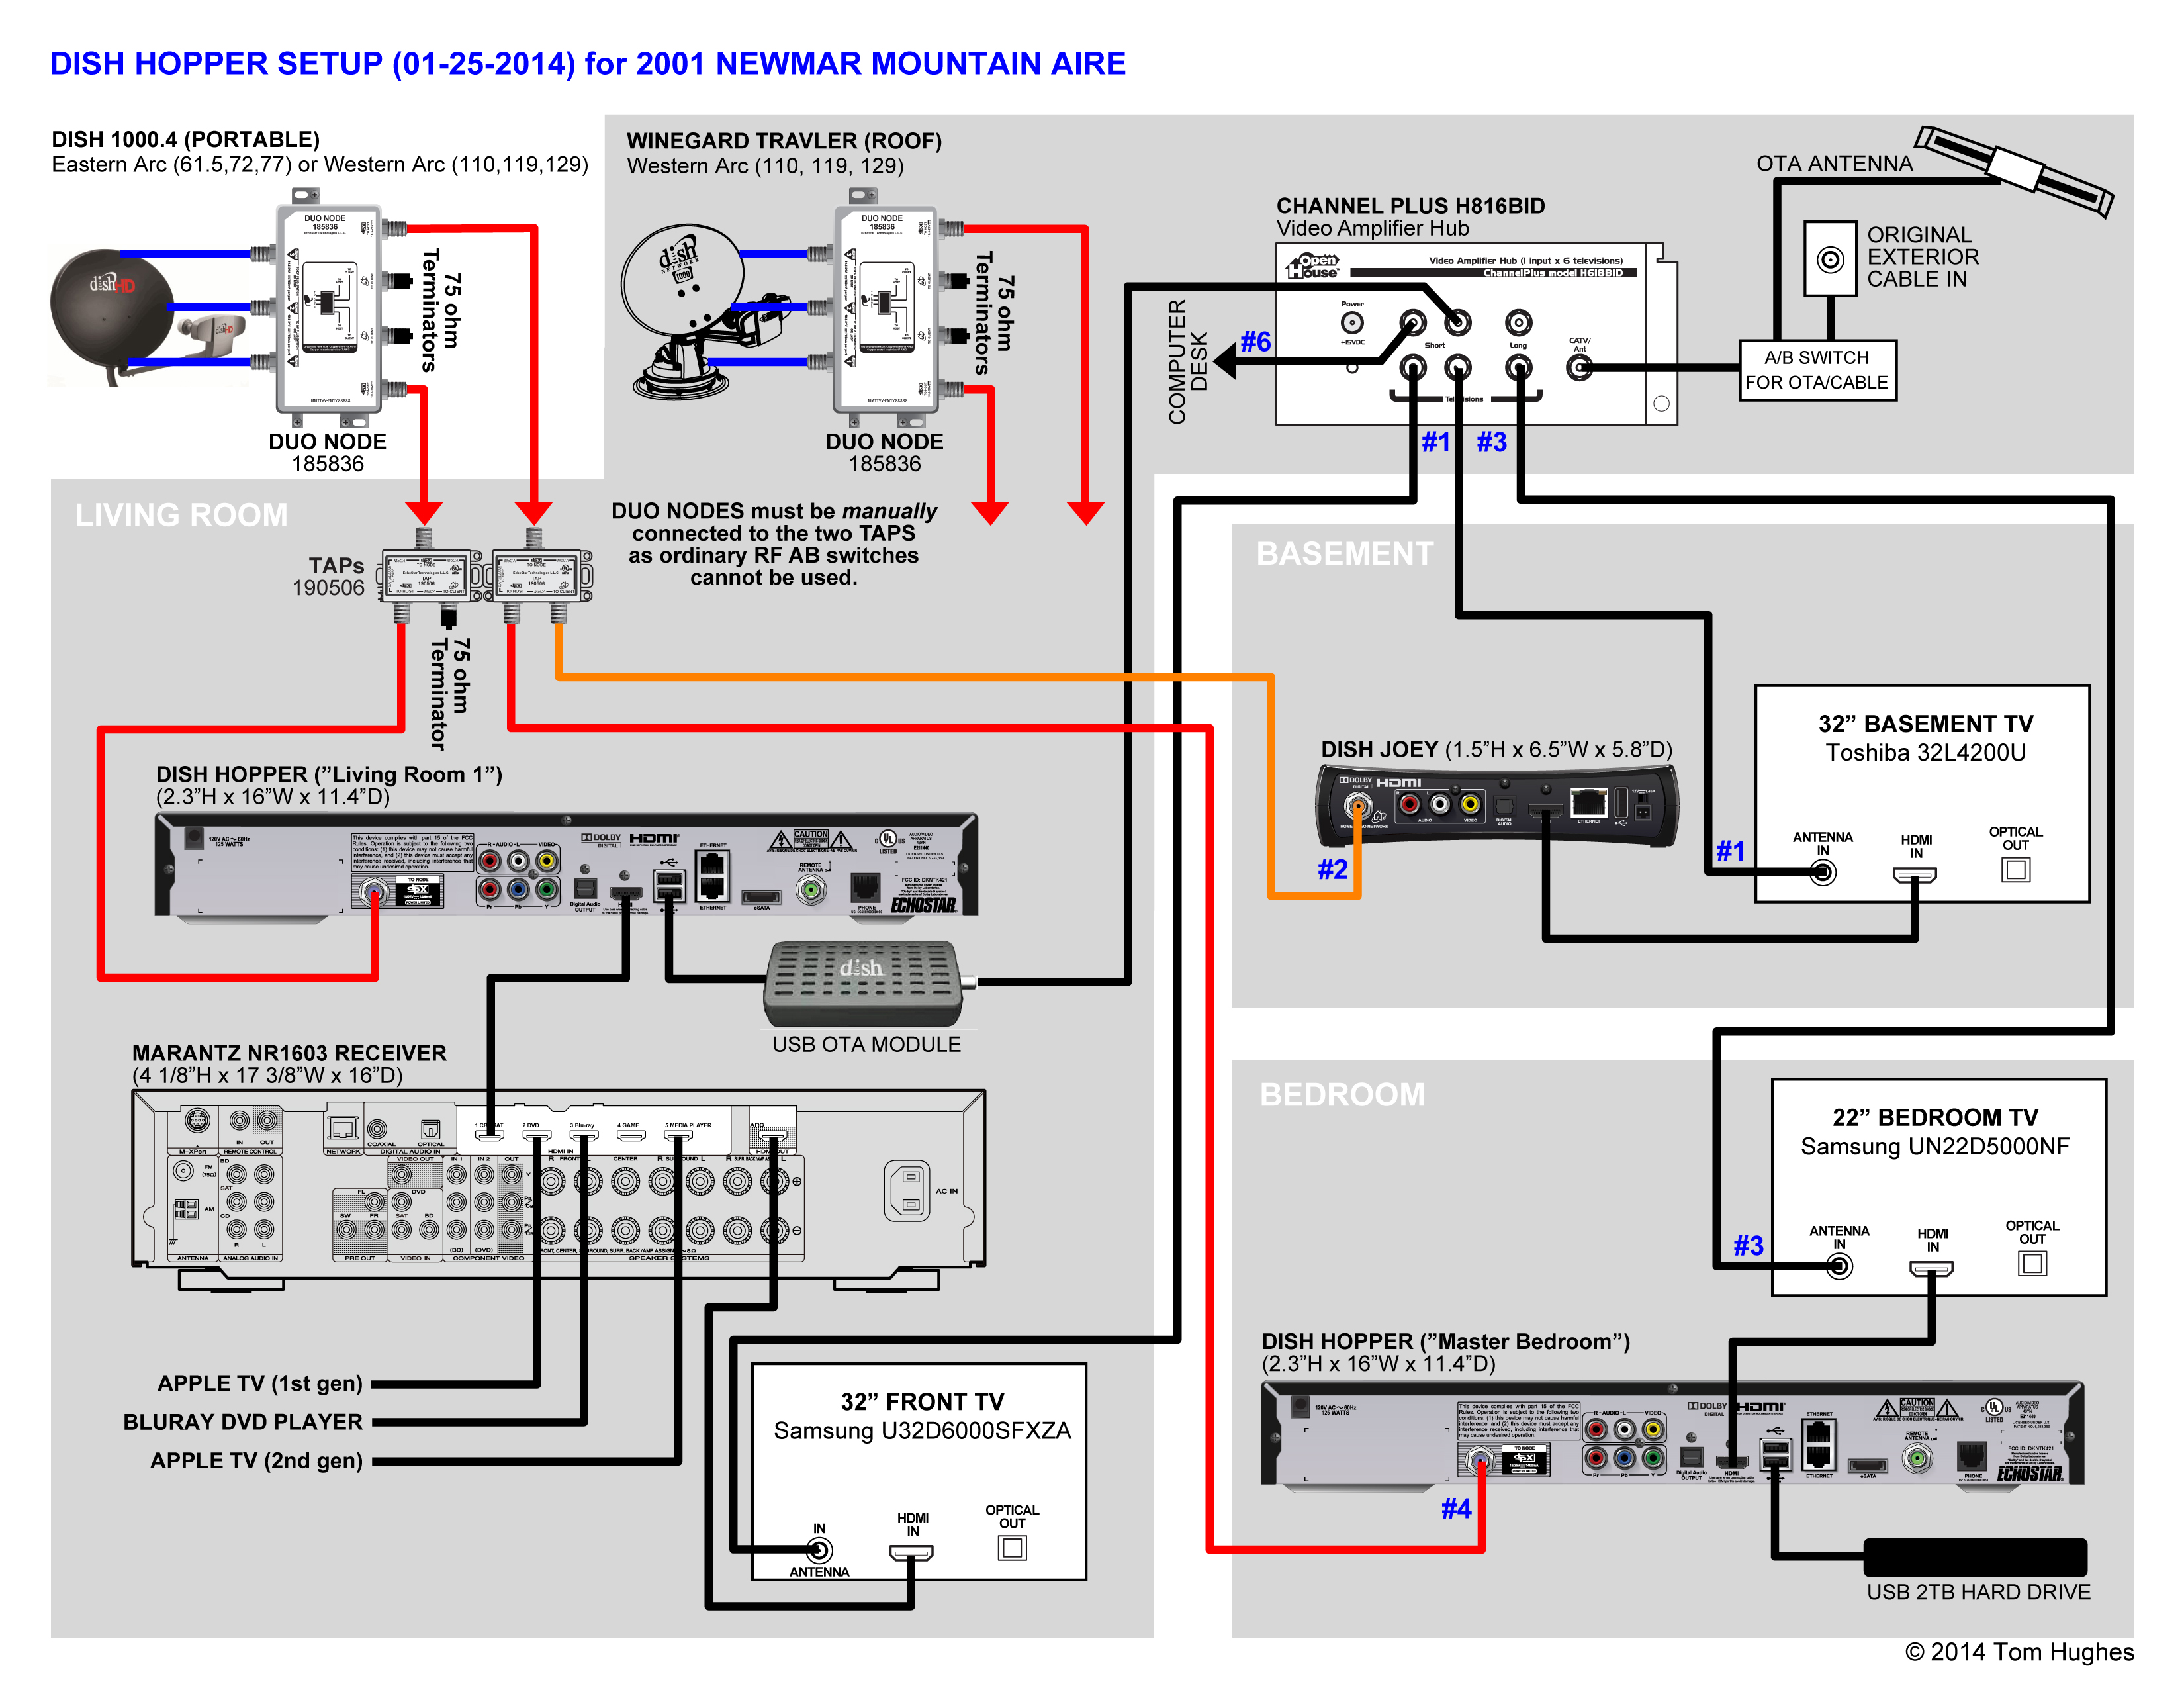 Wiring Diagram For Dish Network Wally dishtv connection diagrams 